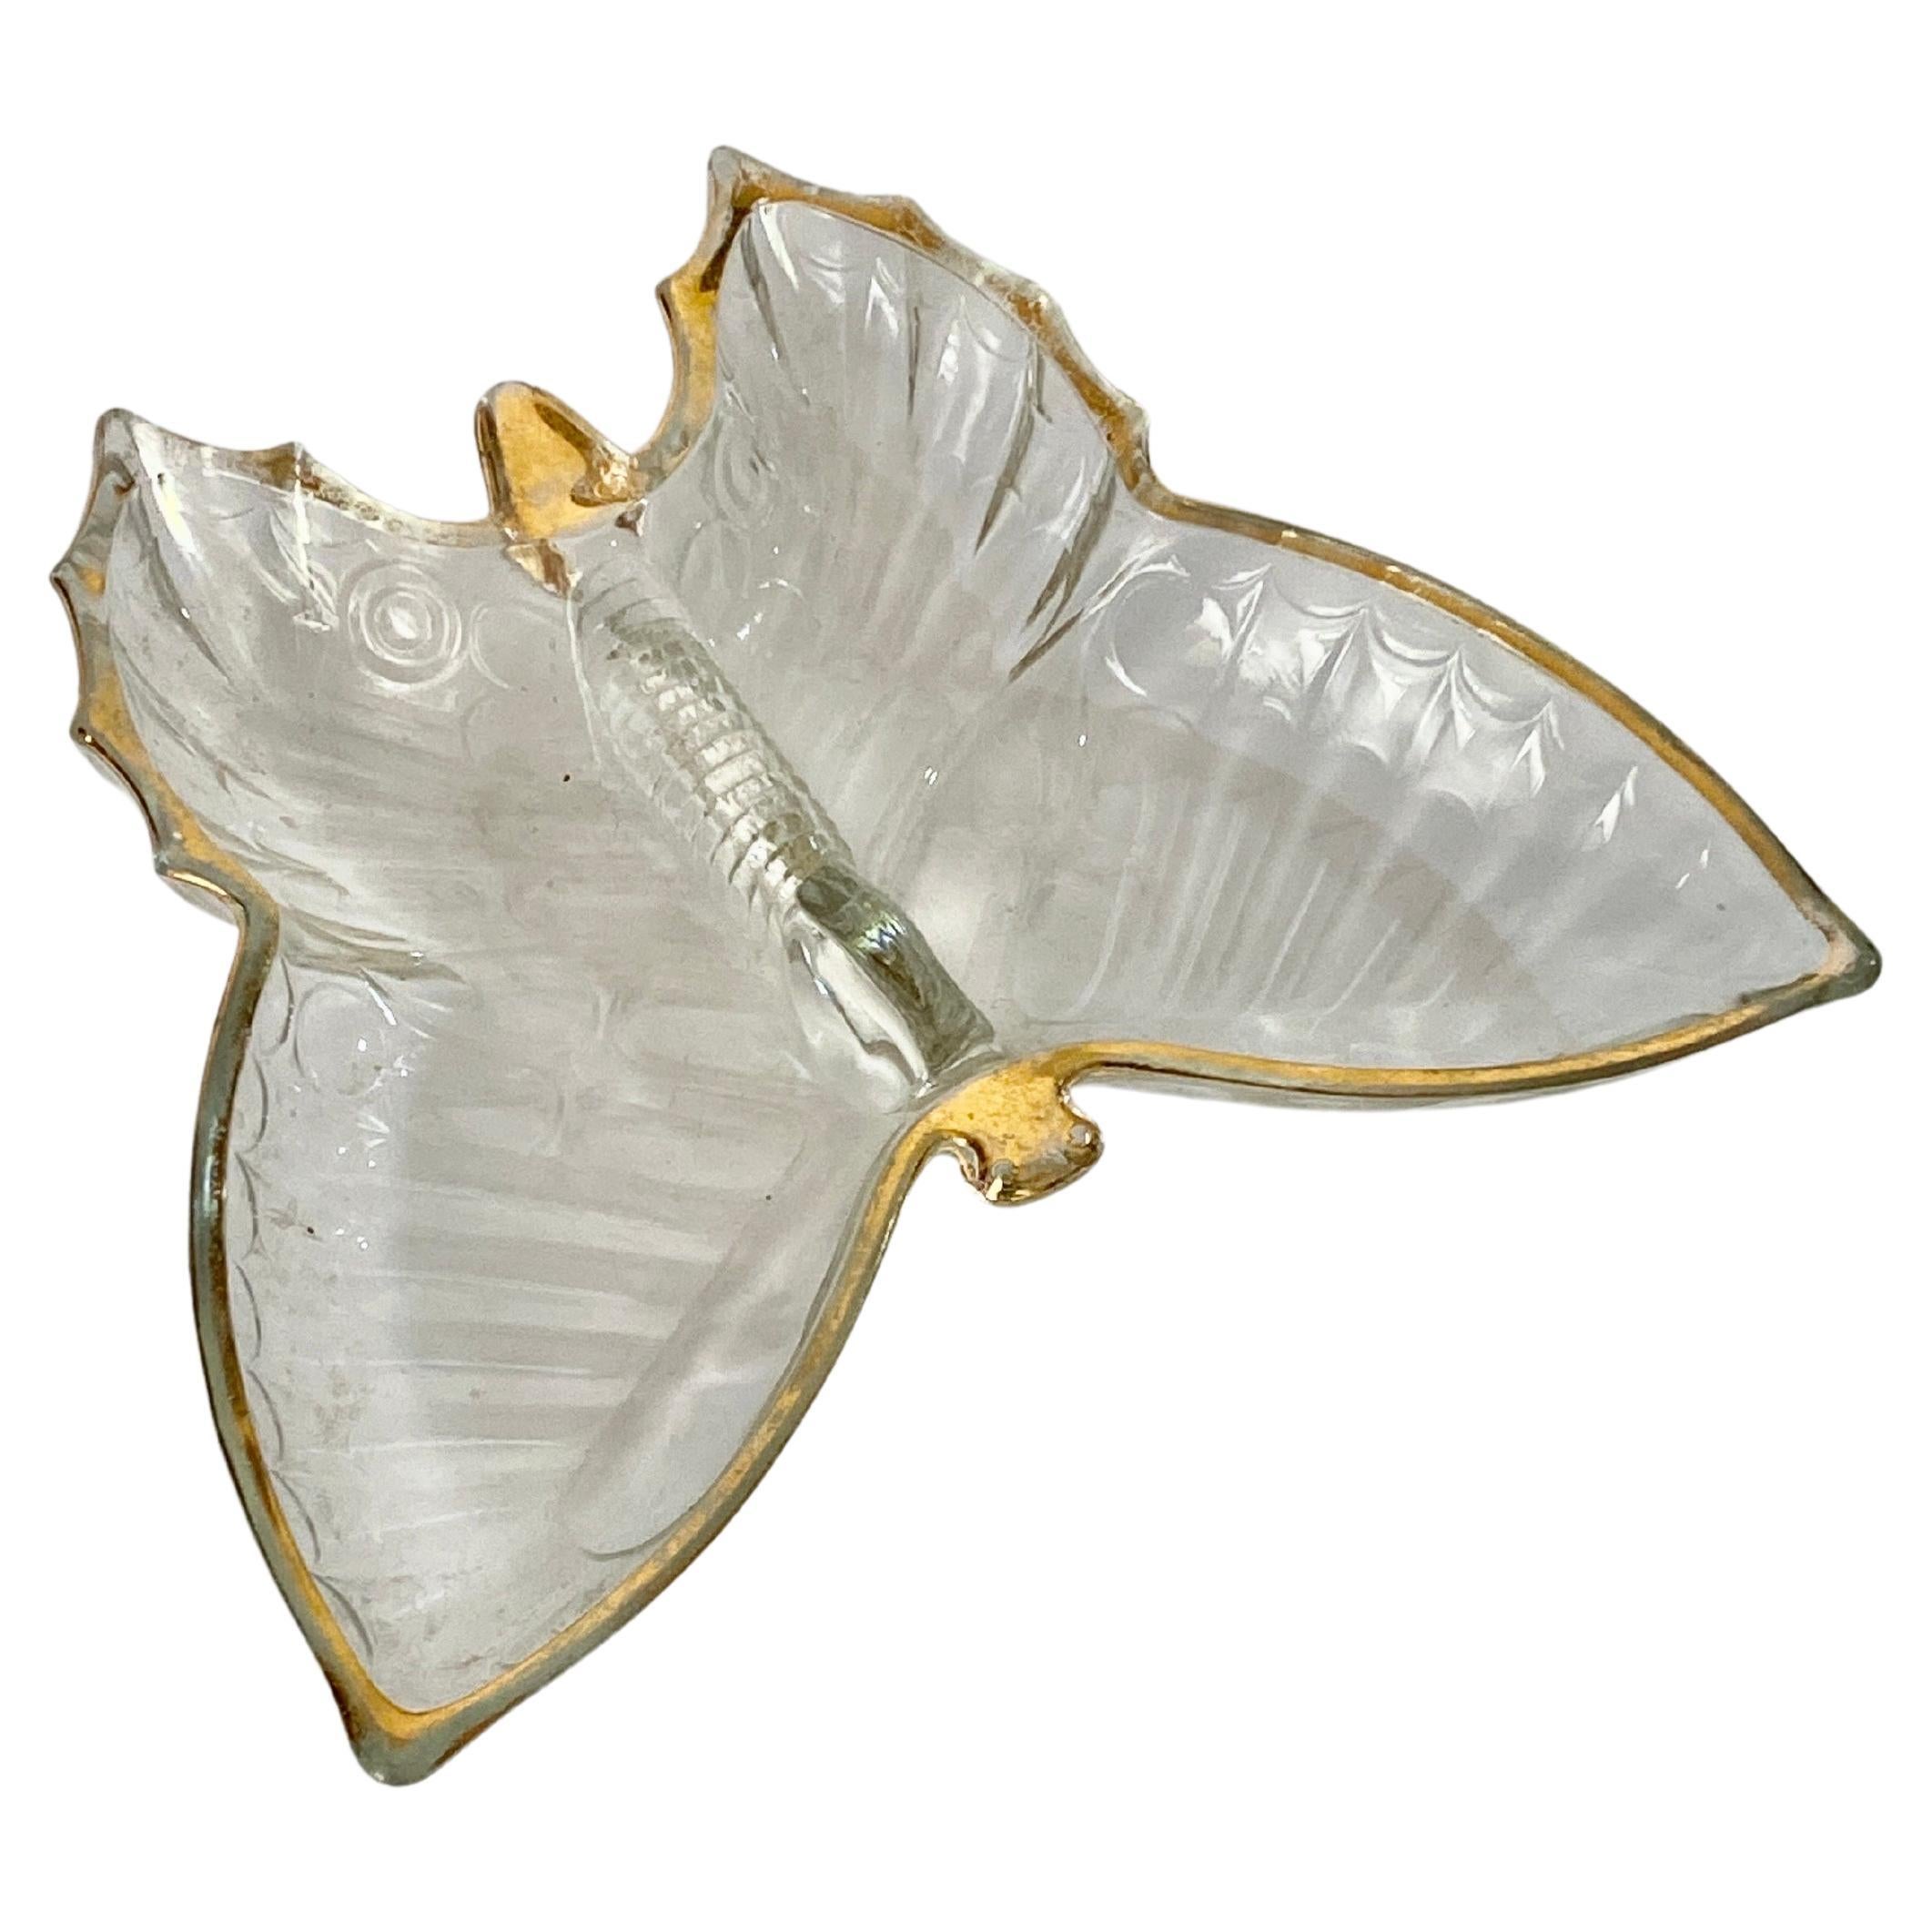 It is a glass ashtray, in the shape of a butterfly. It was made in France in the 80s. It has a gold edging that runs around the edge and the head of the ashtray.